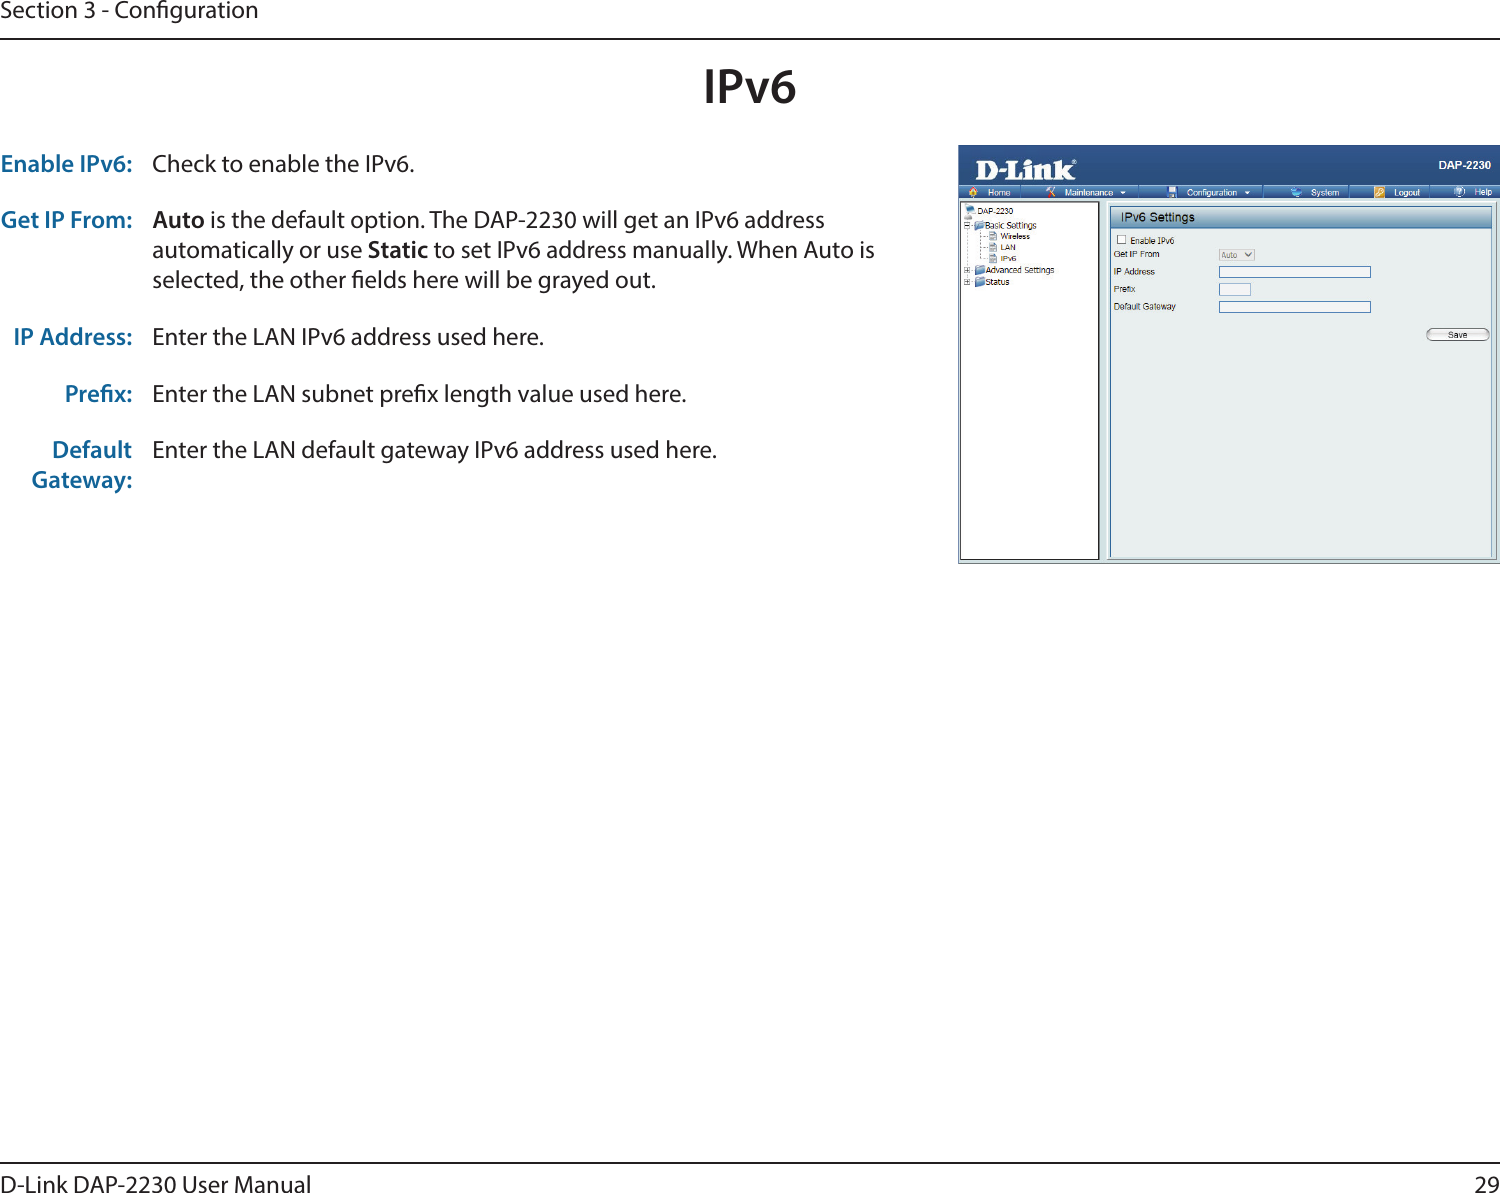 29D-Link DAP-2230 User ManualSection 3 - CongurationIPv6Enable IPv6: Check to enable the IPv6.Get IP From: Auto is the default option. The DAP-2230 will get an IPv6 address automatically or use Static to set IPv6 address manually. When Auto is selected, the other elds here will be grayed out.IP Address: Enter the LAN IPv6 address used here.Prex: Enter the LAN subnet prex length value used here.Default Gateway:Enter the LAN default gateway IPv6 address used here.